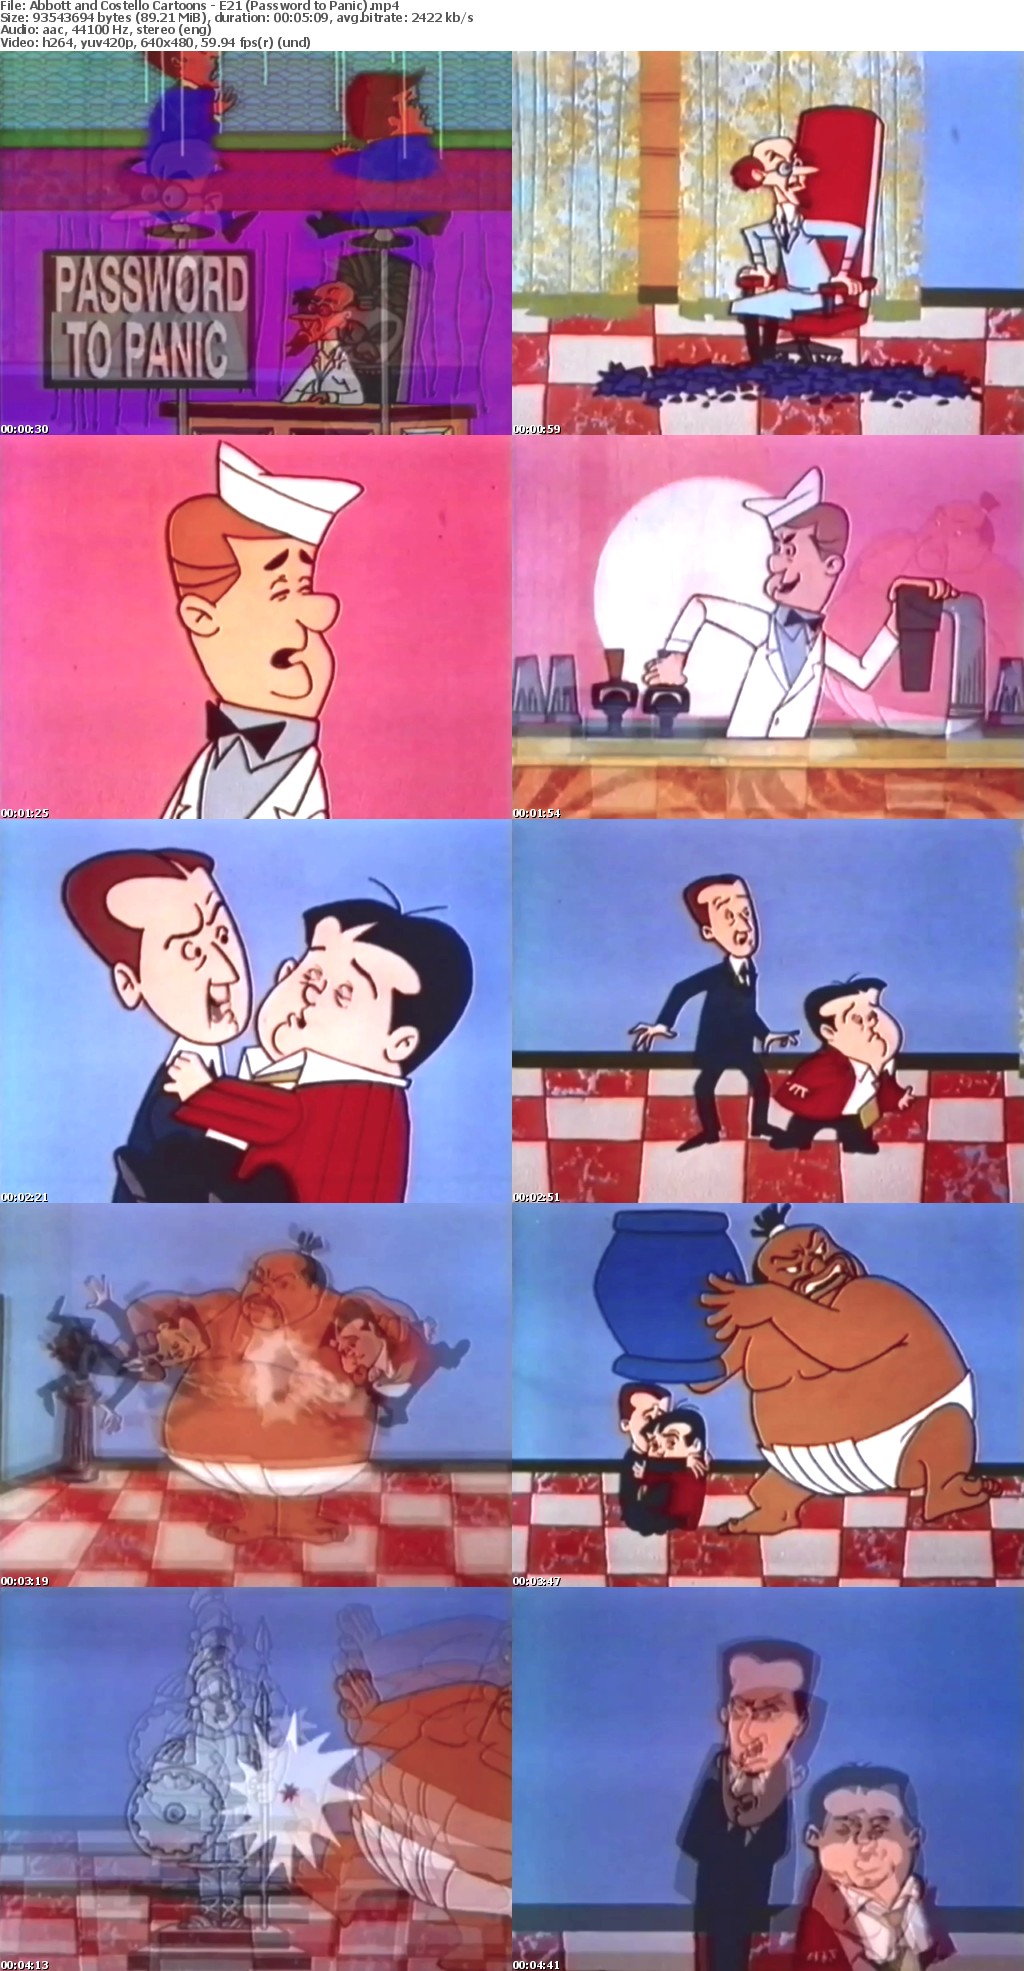 Abbott and Costello Cartoons (Cartoon collection in MP4 format) Lando18